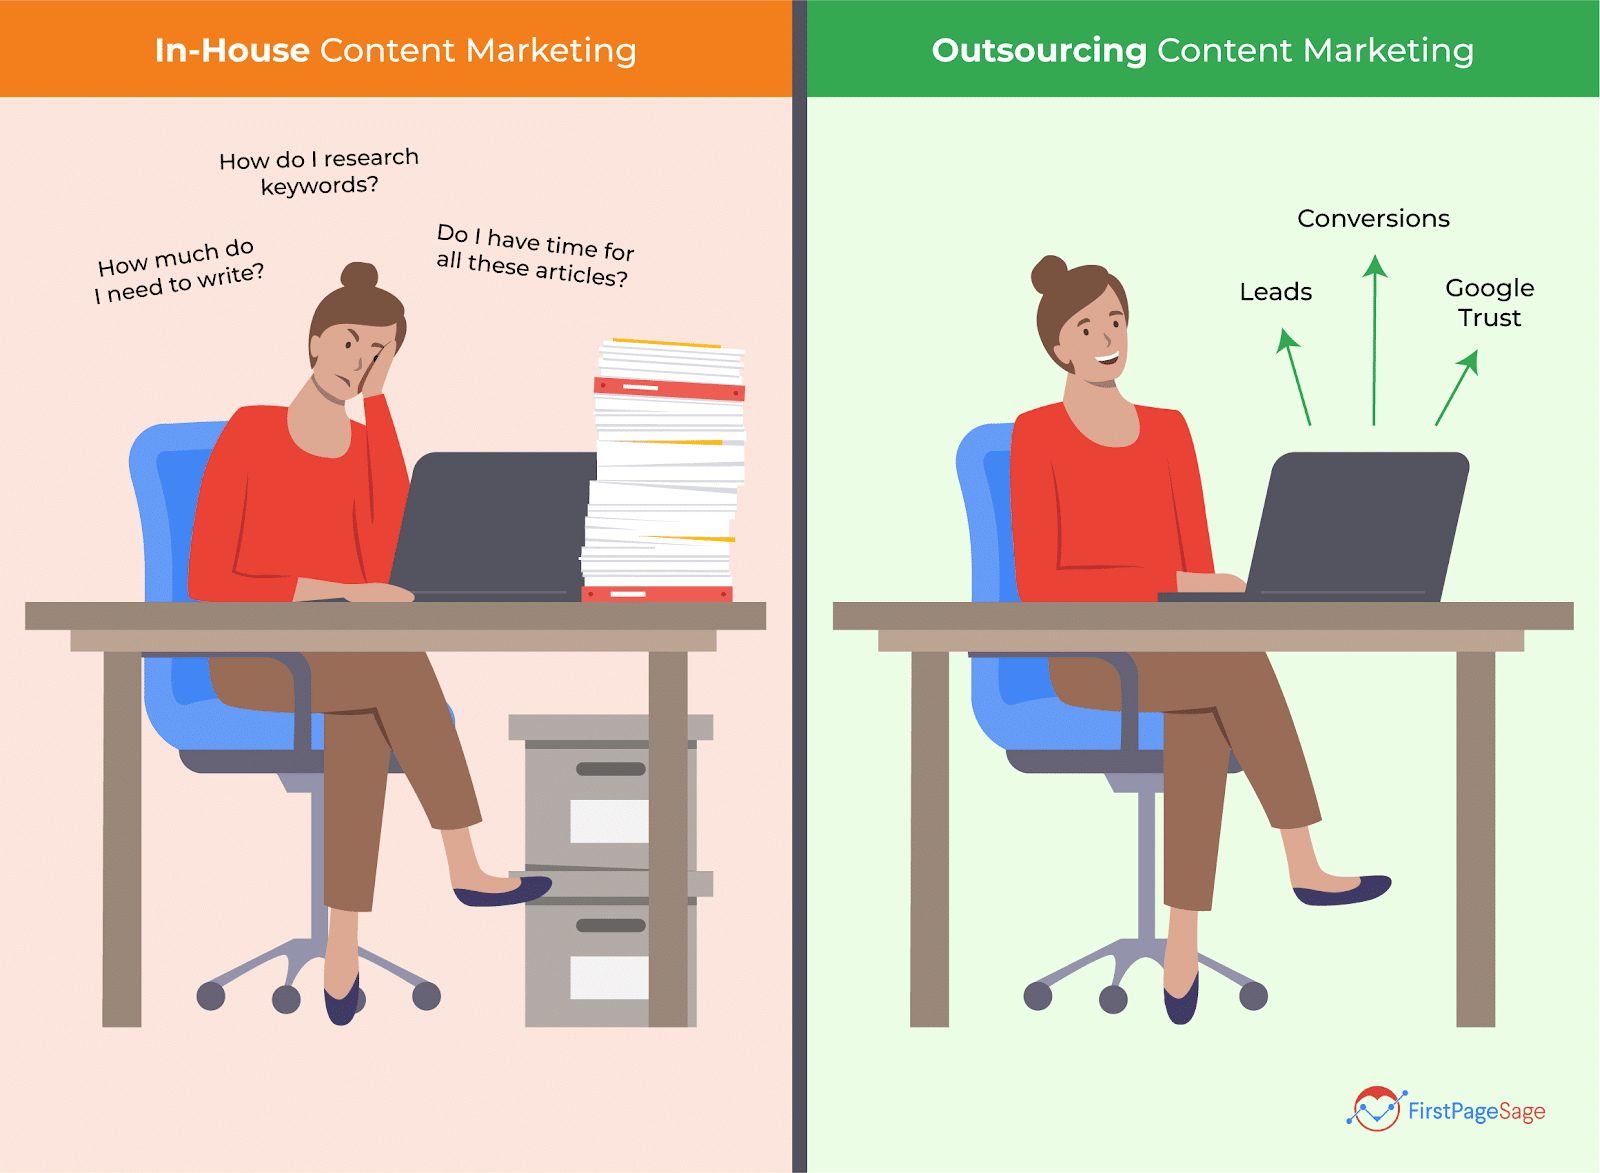 In-House vs. Outsource Content Marketing